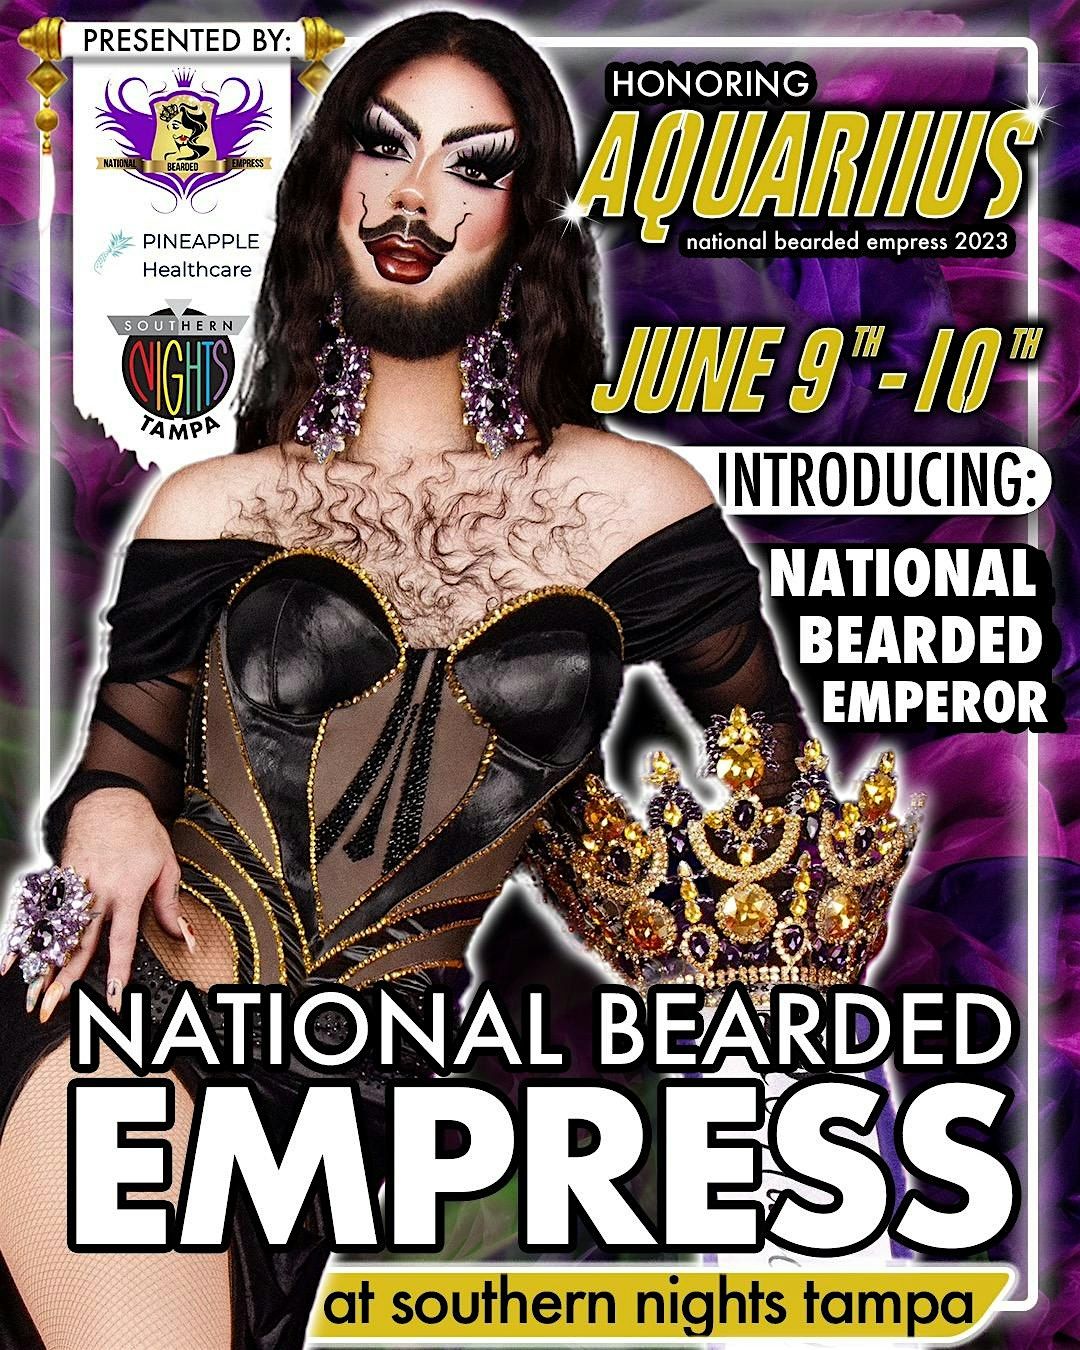 The National Bearded Empress Pageant